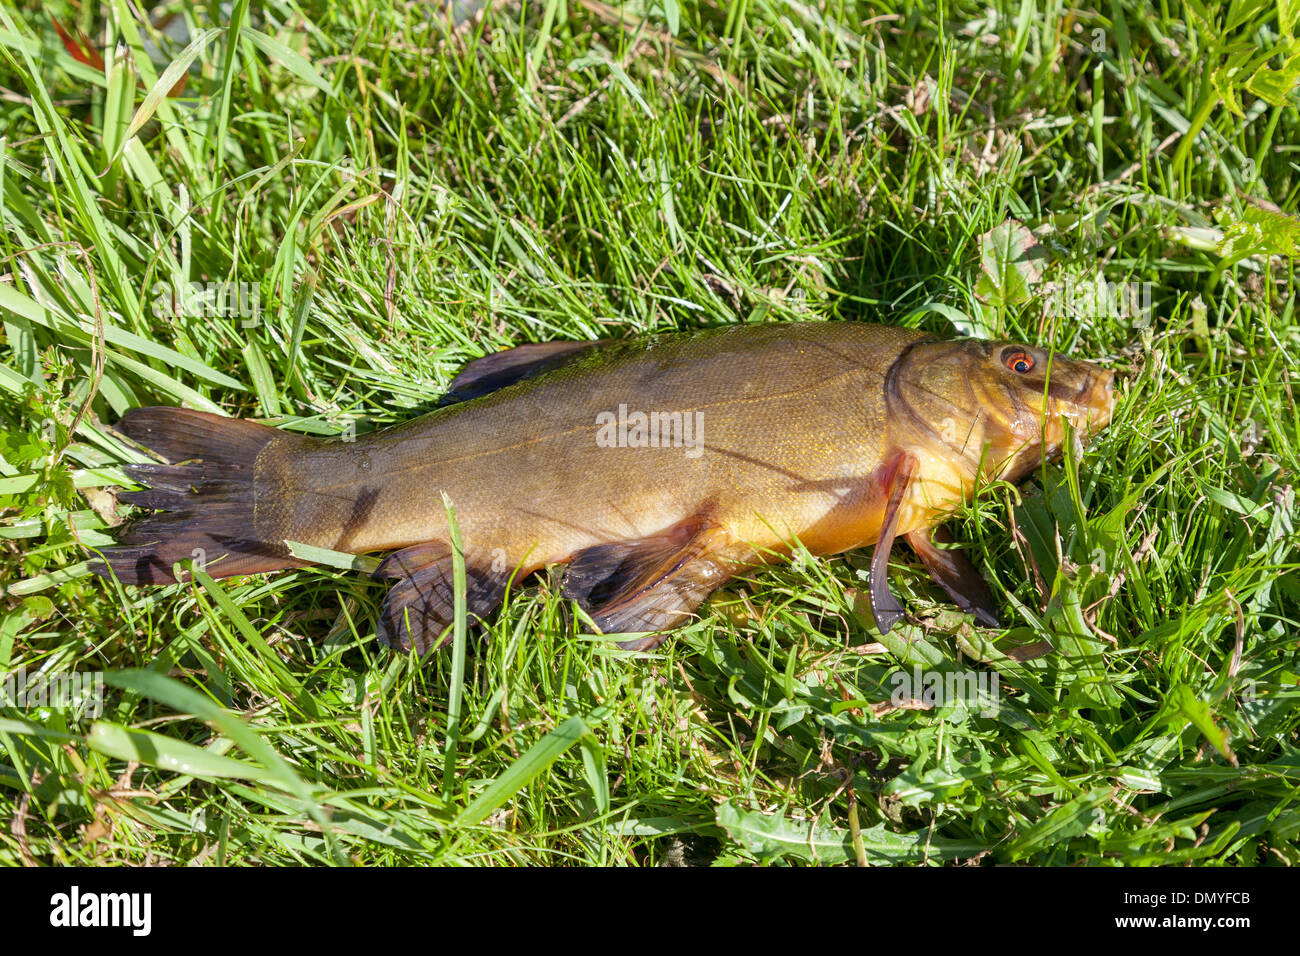 Large freshwater tench on the grass Stock Photo